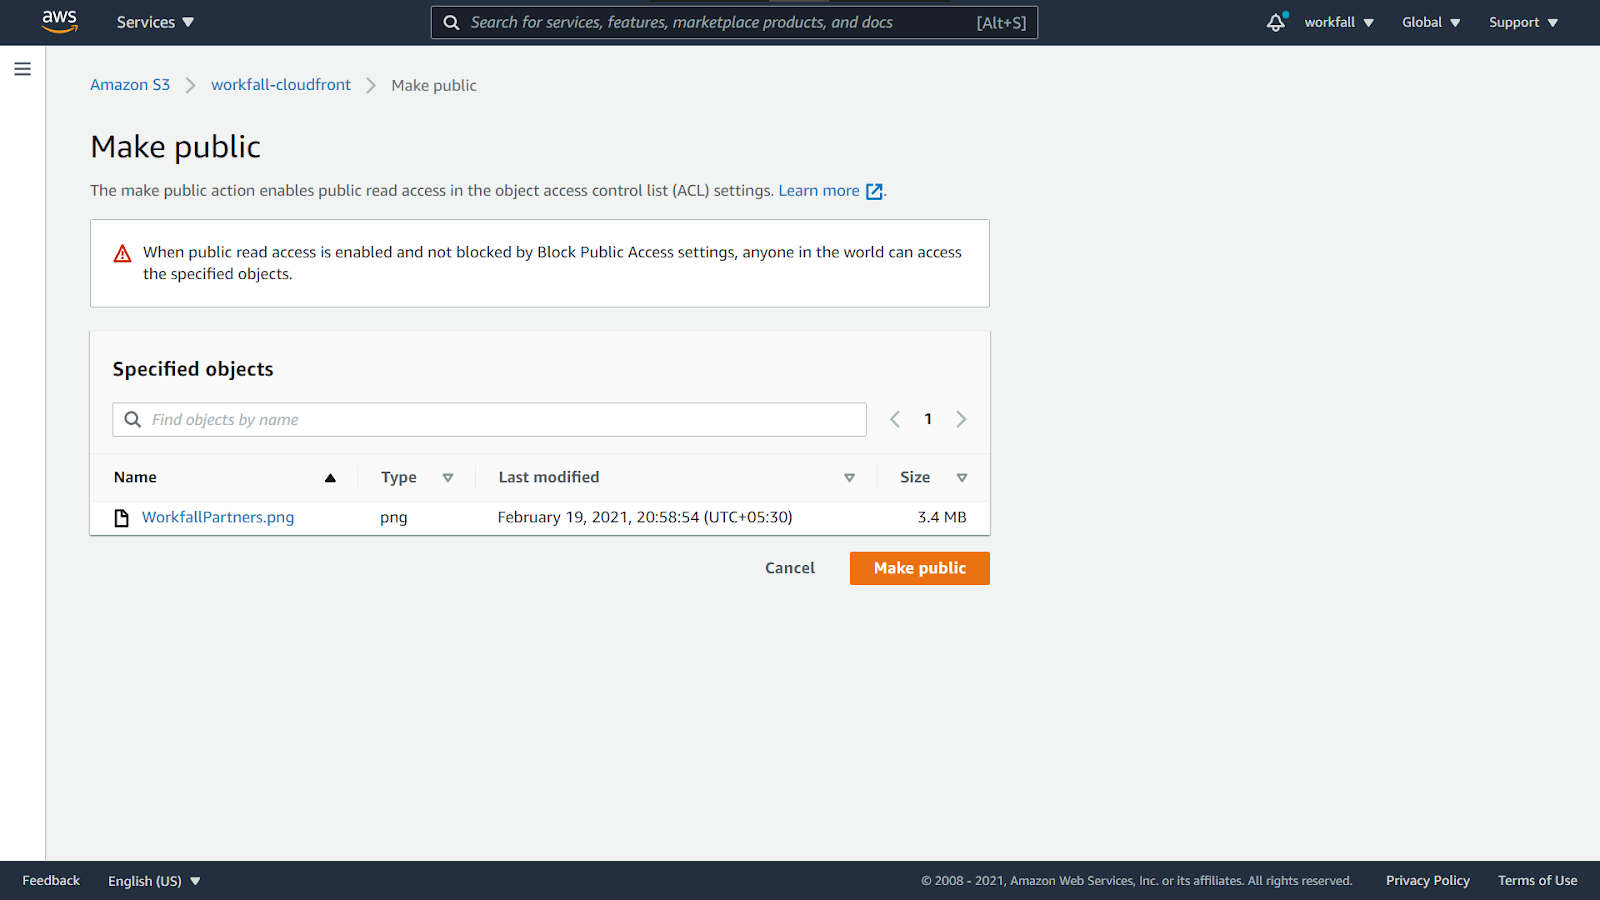 How to set up an AWS CloudFront distribution to speed up content delivery?